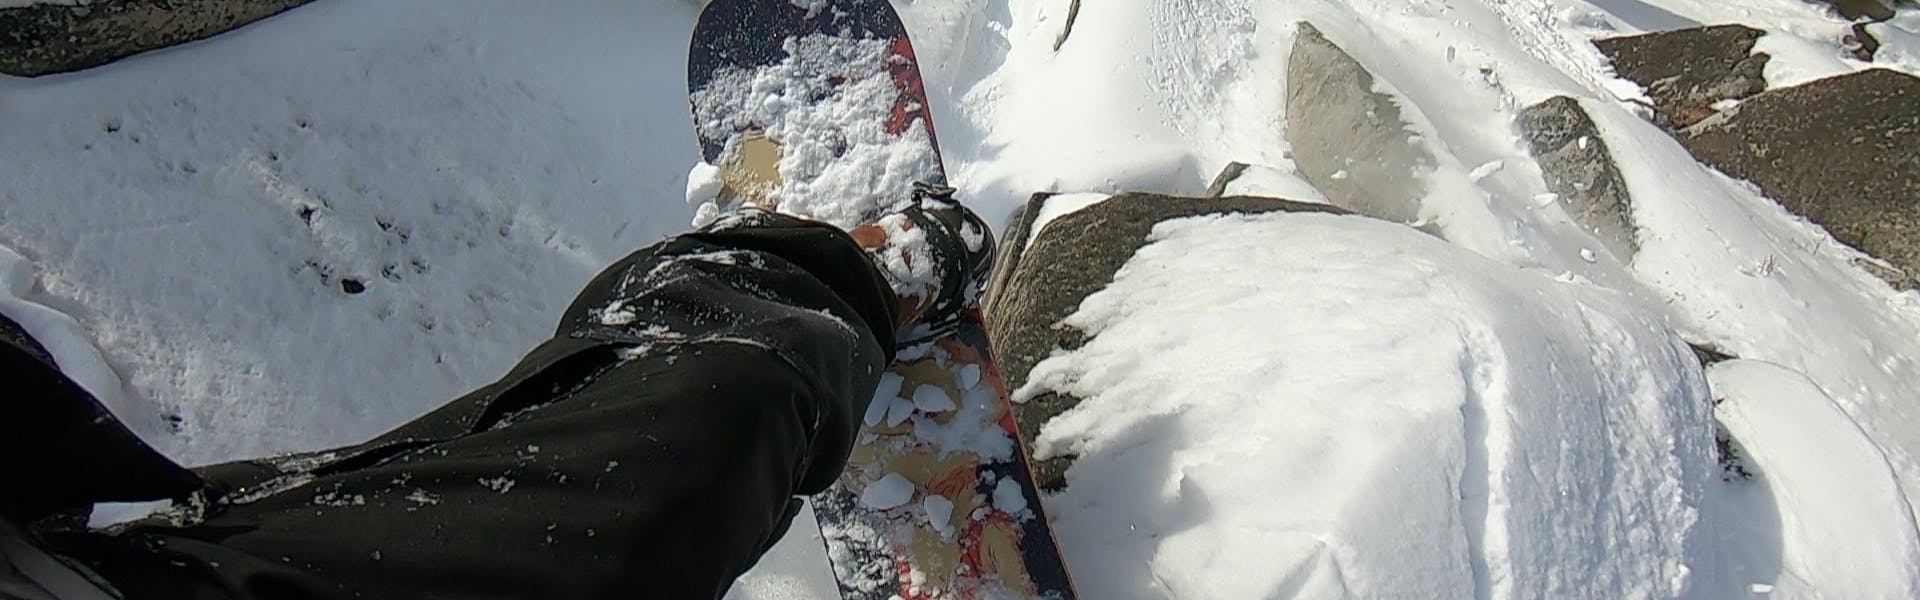 Top down view of the Rossignol Retox Snowboard. 